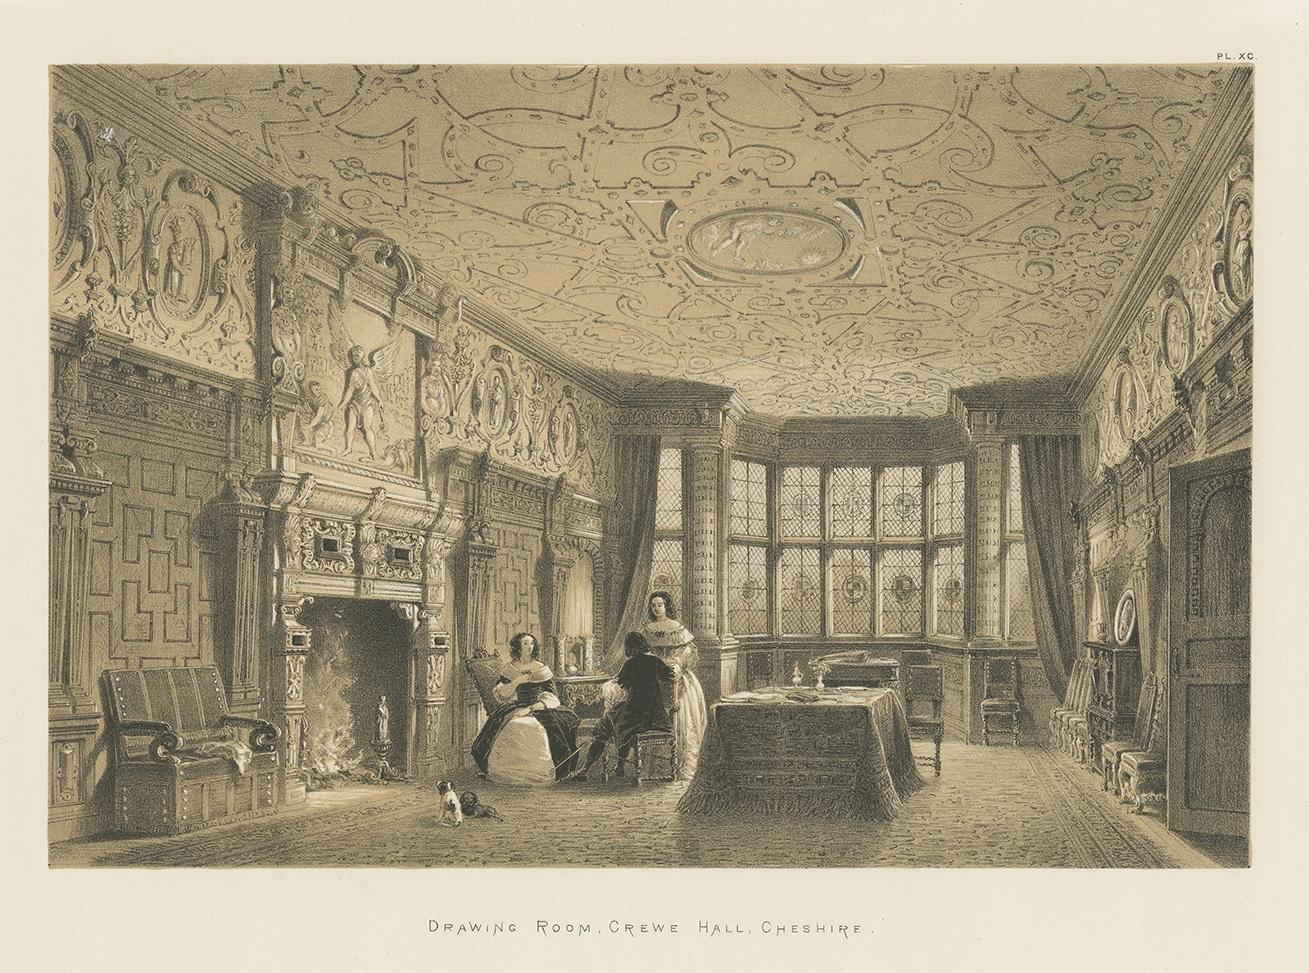 Antique print titled 'Drawing Room. Crewe Hall, Cheshire'. Lithograph of the drawing room of Crewe Hall, a Jacobean mansion located near Crewe Green, east of Crewe, in Cheshire, England. This print originates from 'The Mansions of England in the